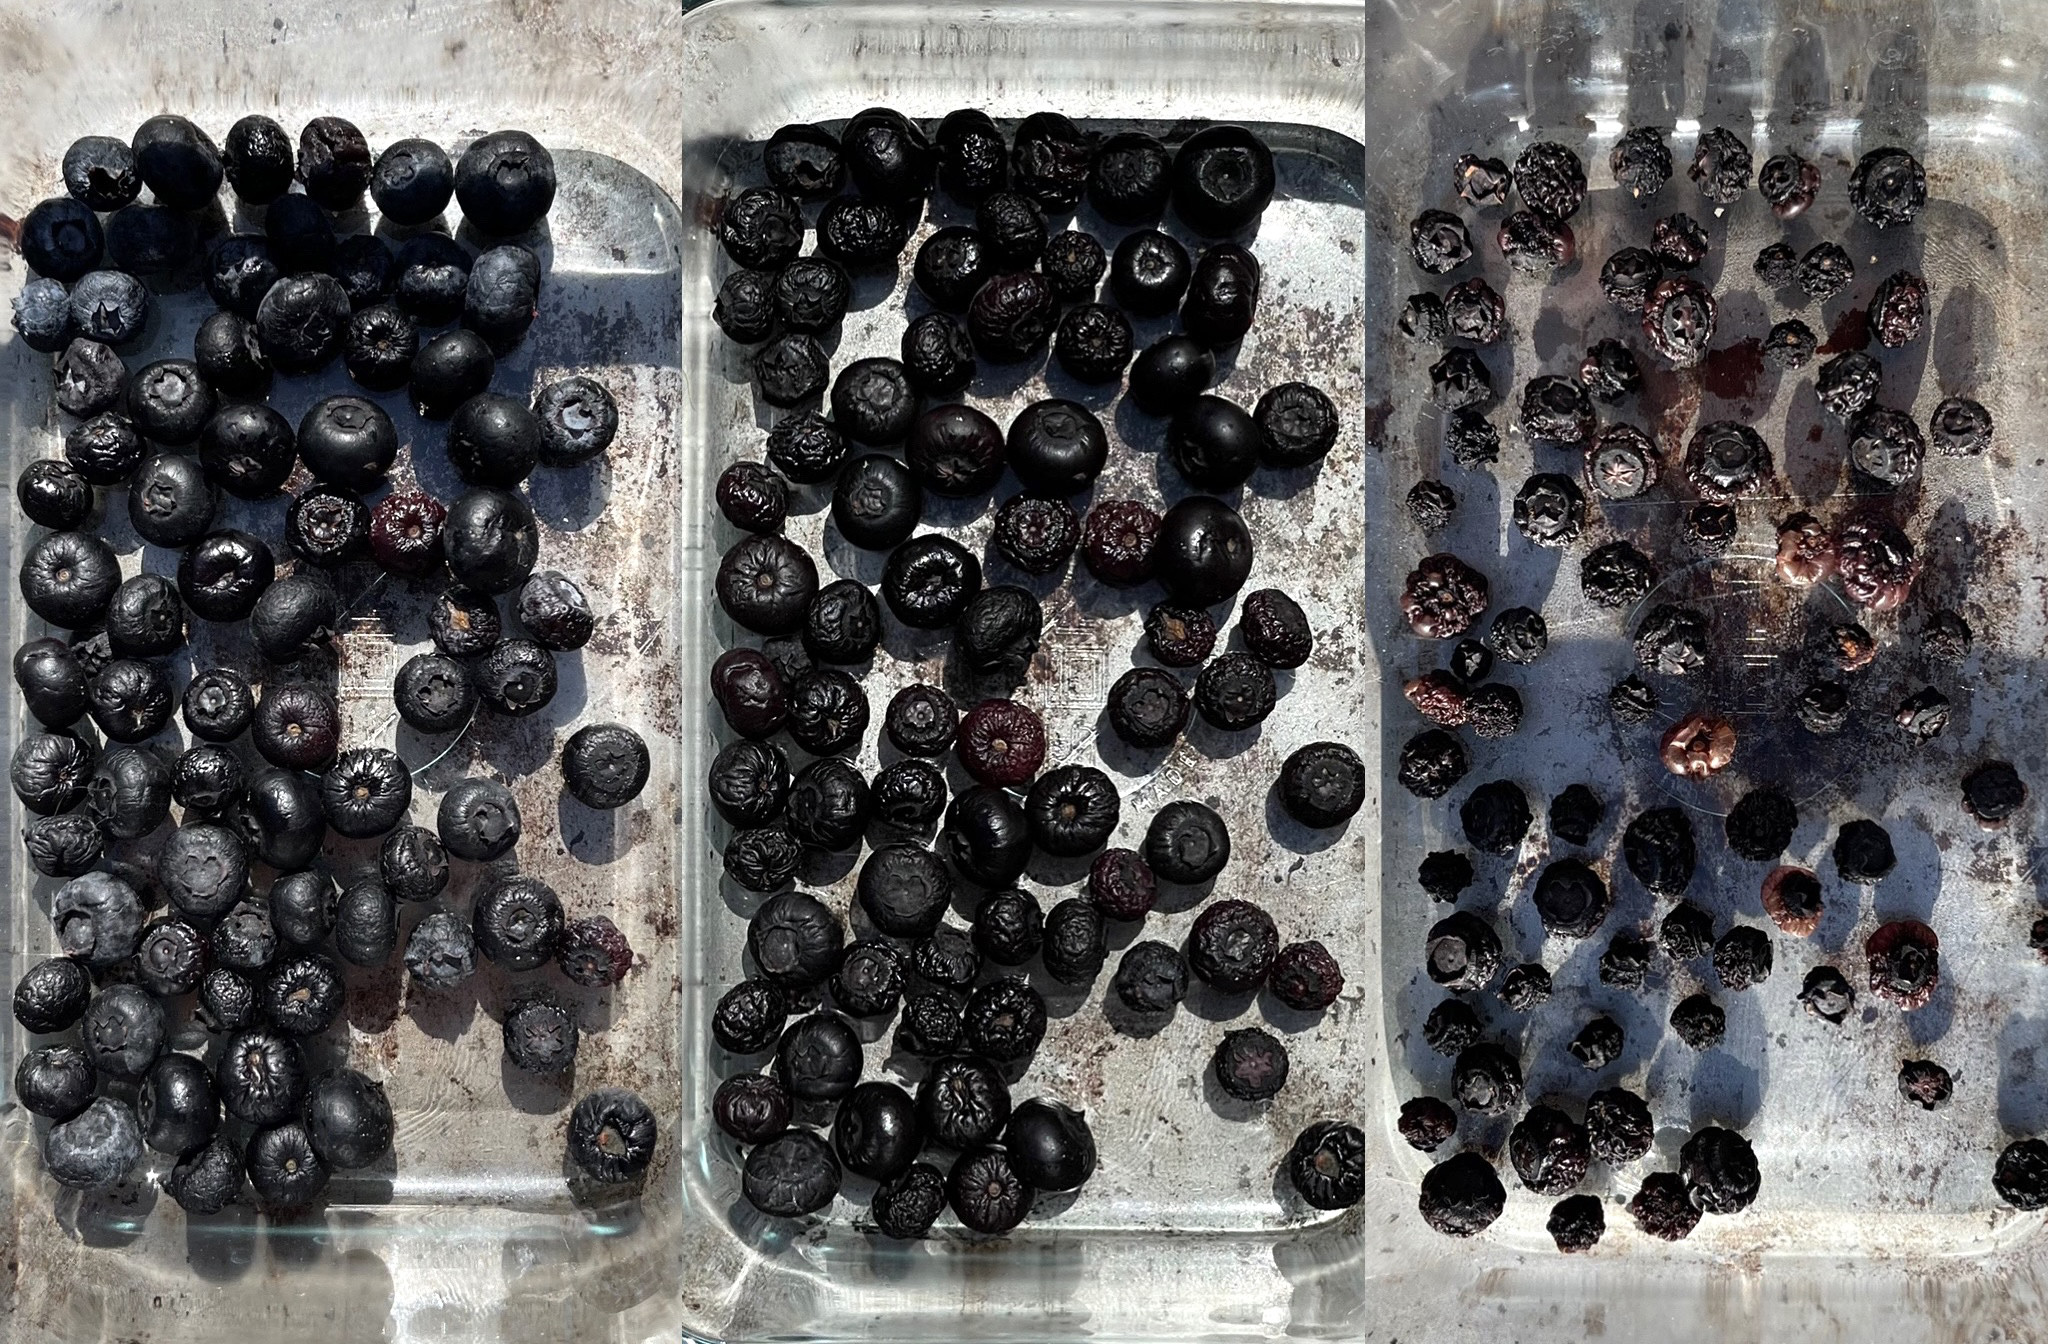 How to Dehydrate Fruit Outside Without a Solar Dehydrator - Zero